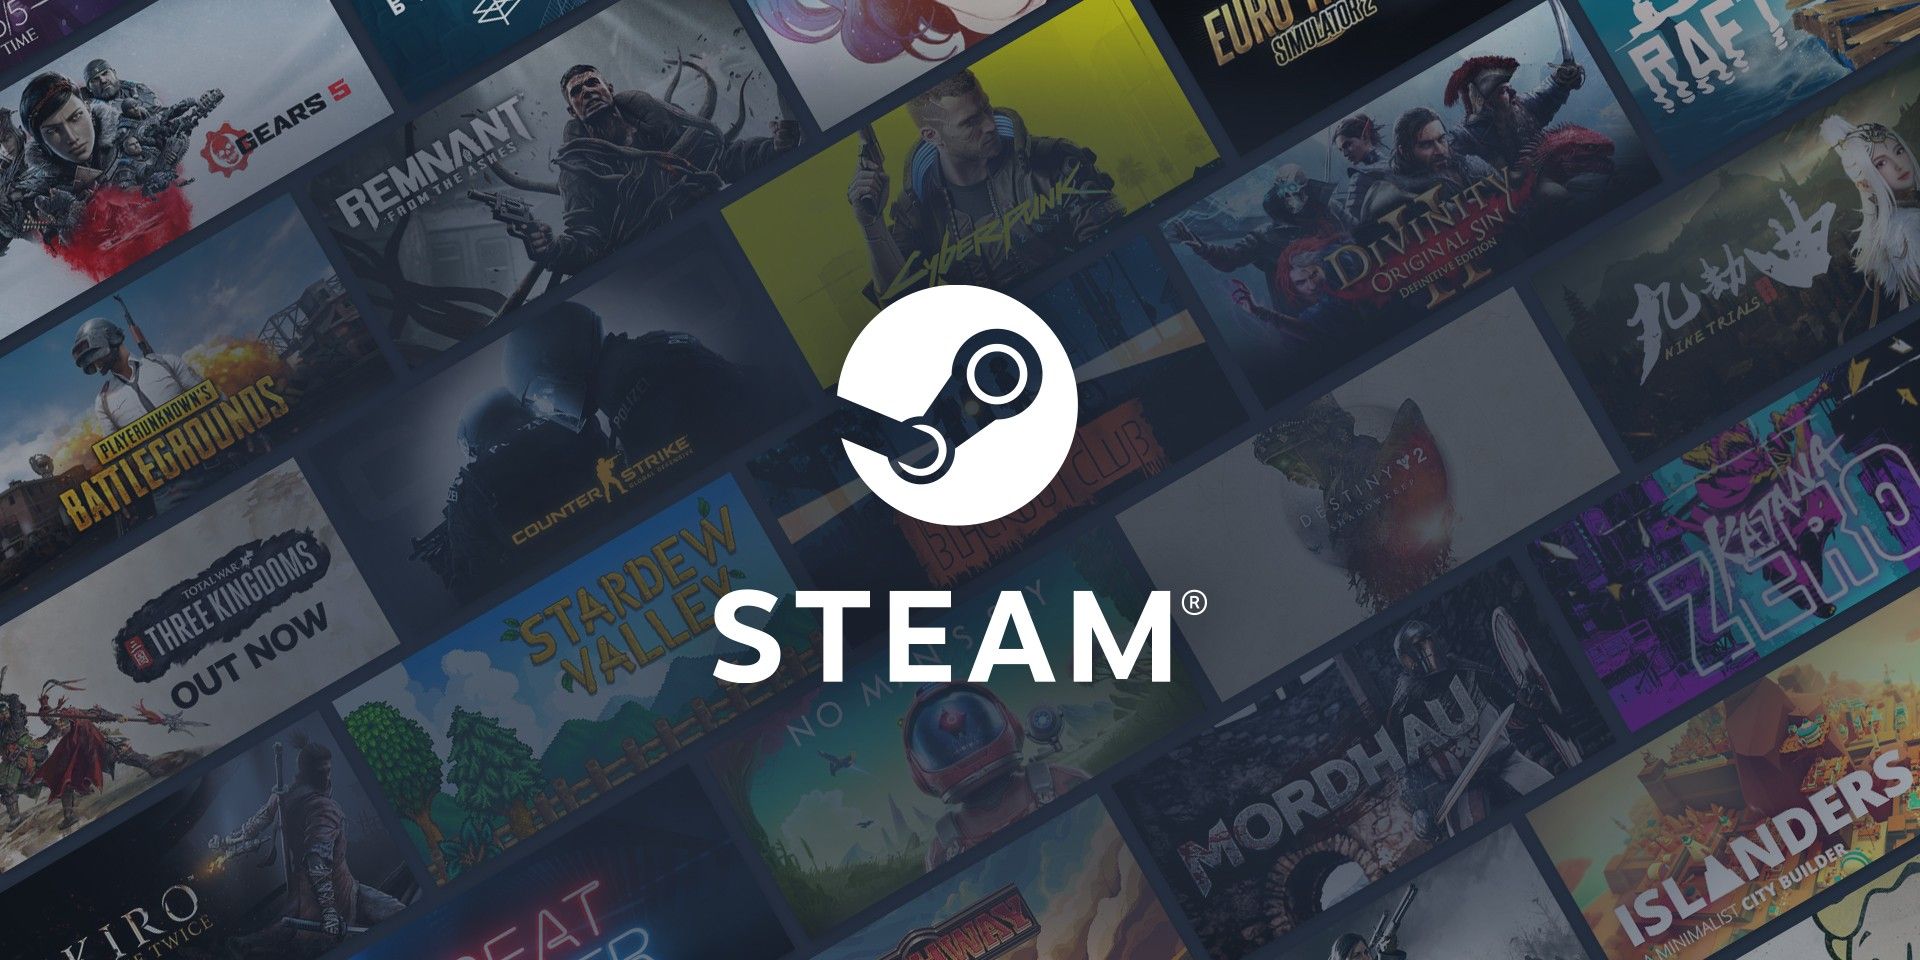 Steam Store logo and titles